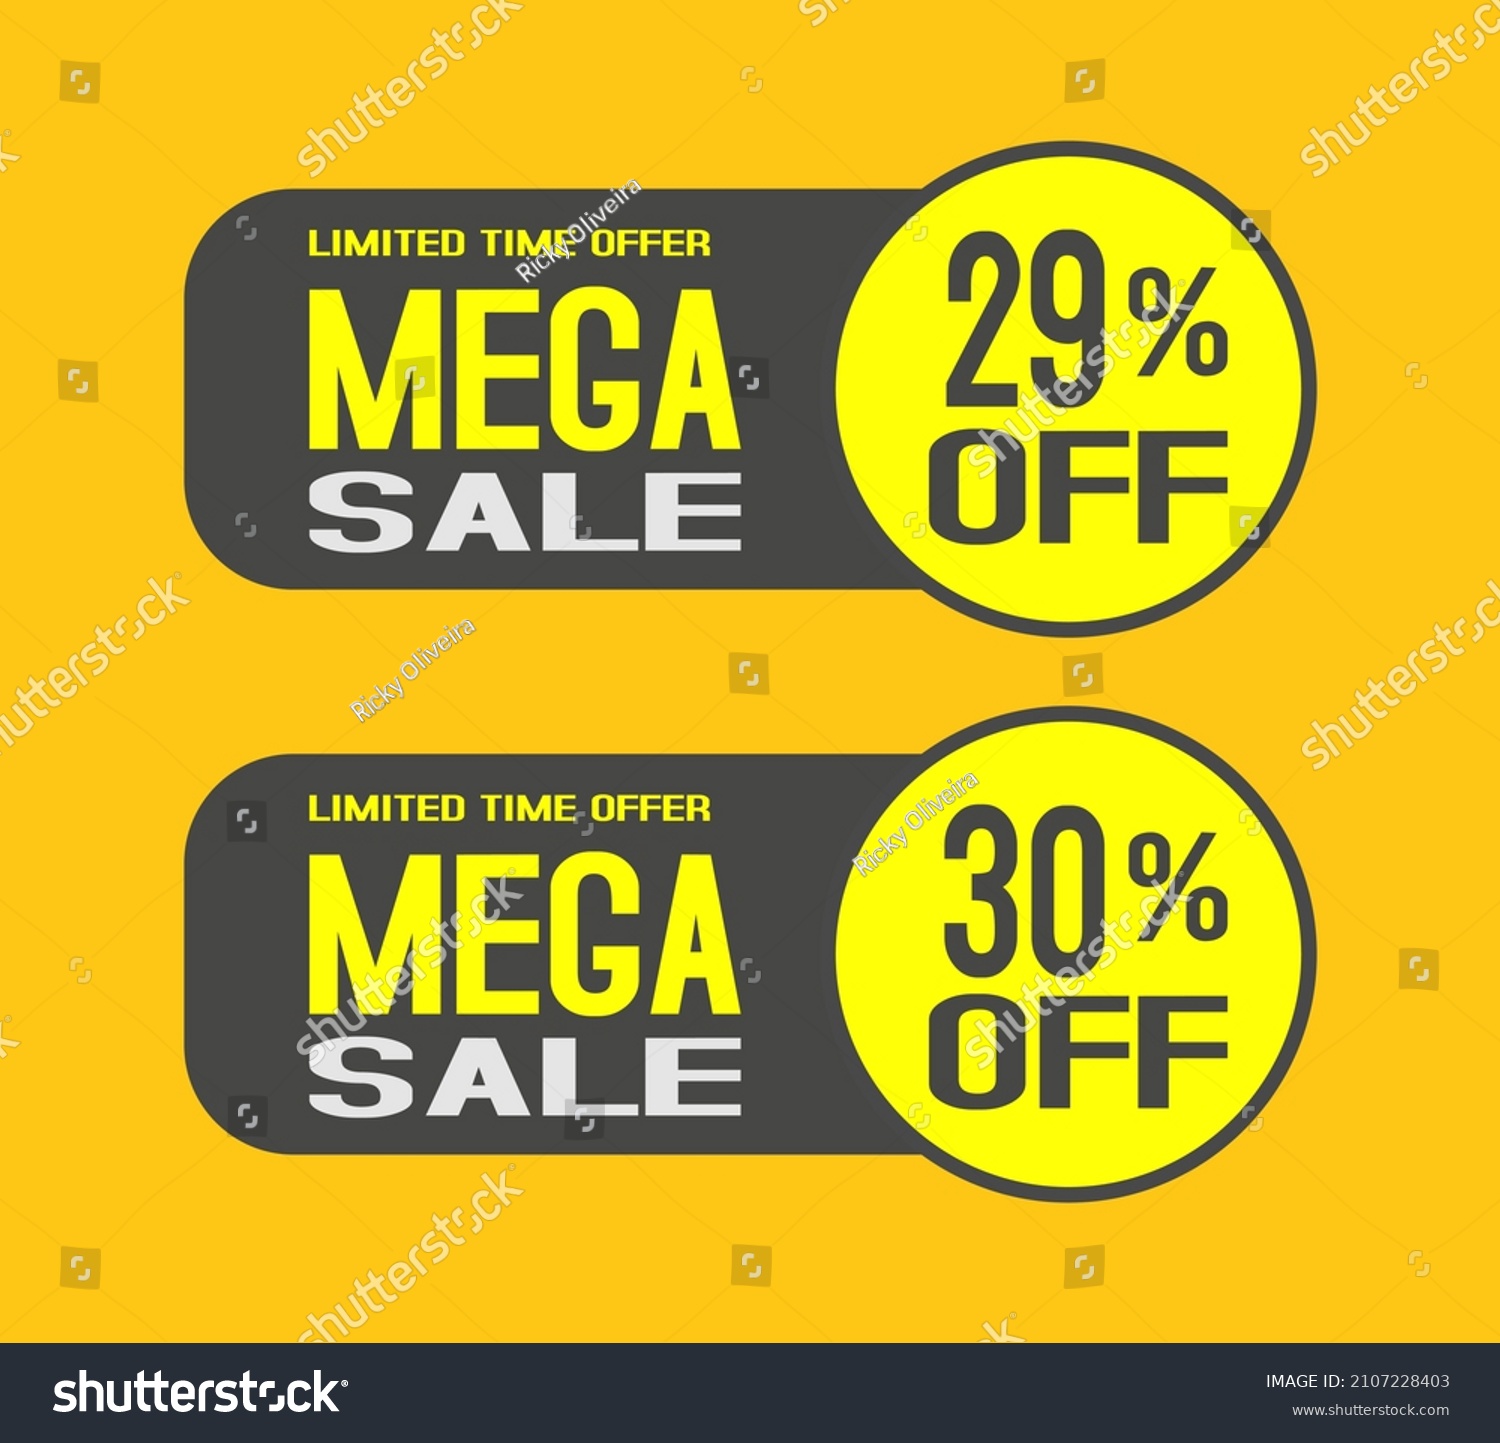 SVG of mega sale tags offers 29 and 30 percent off svg